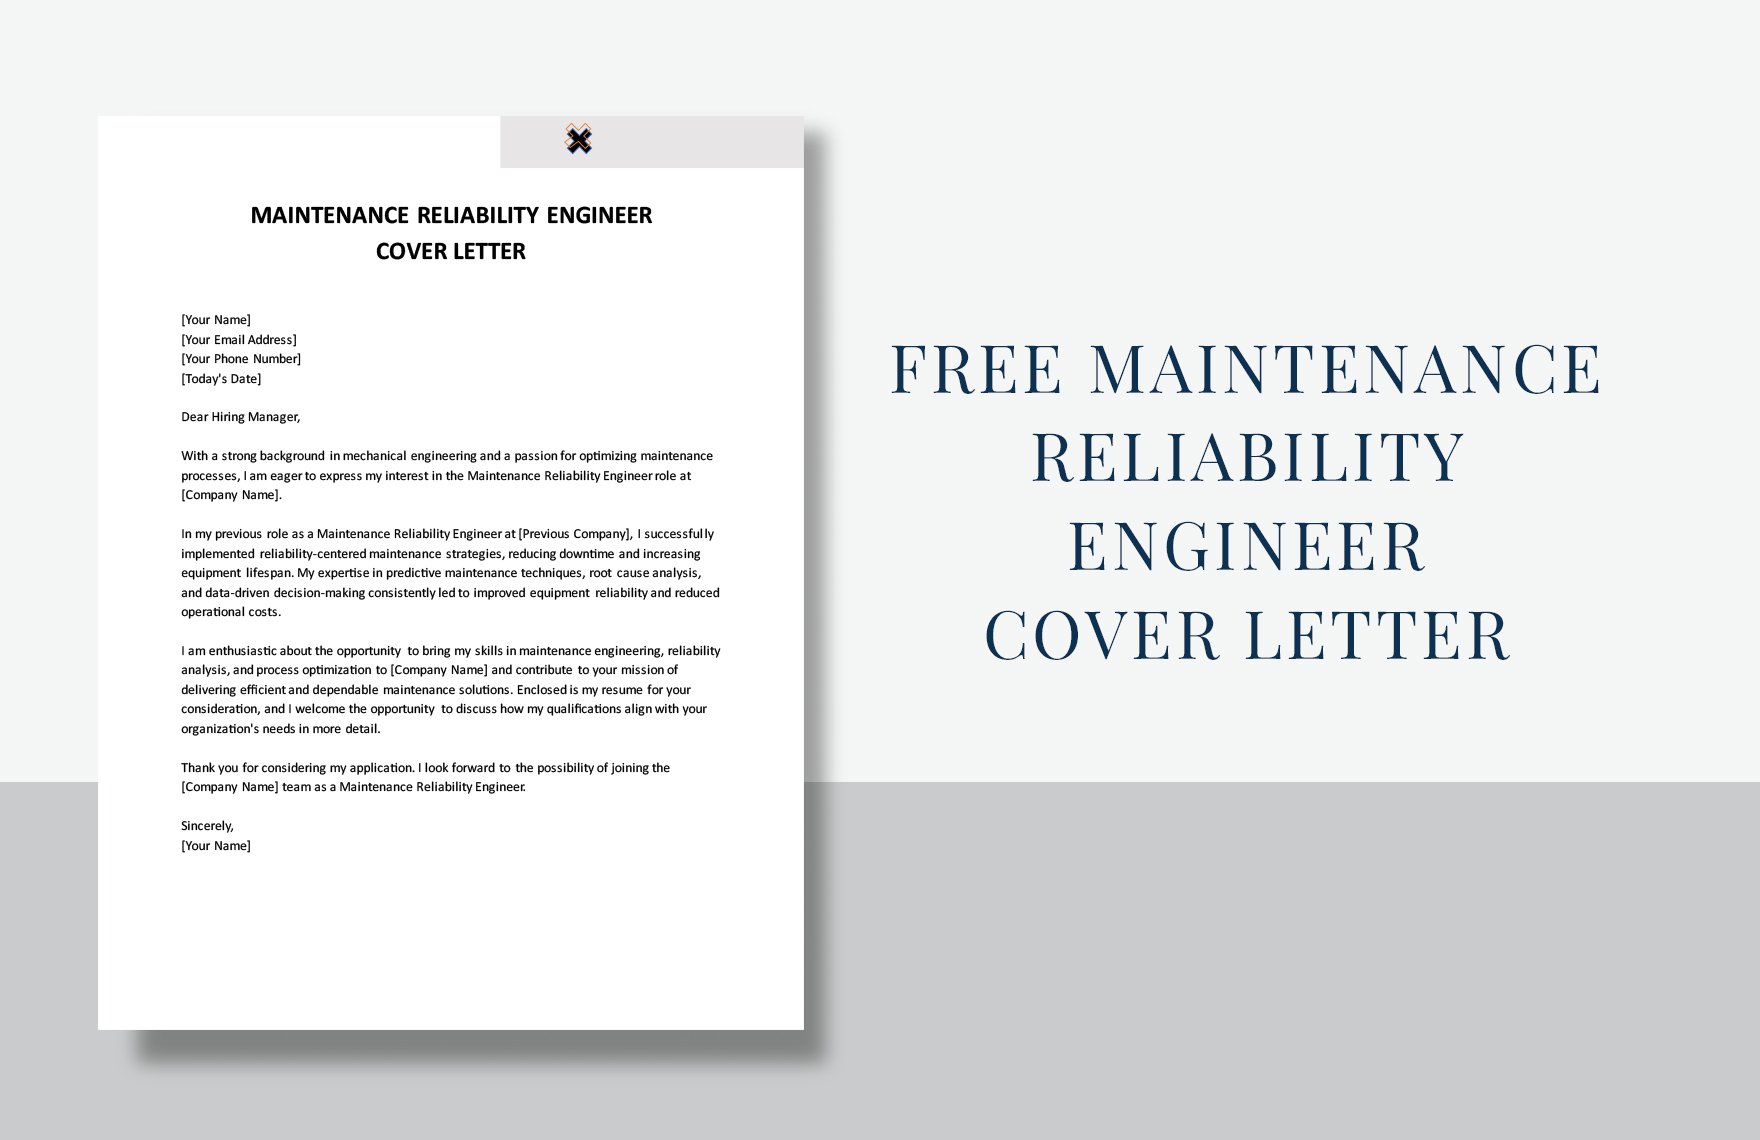 Maintenance Reliability Engineer Cover Letter in Word, Google Docs, PDF